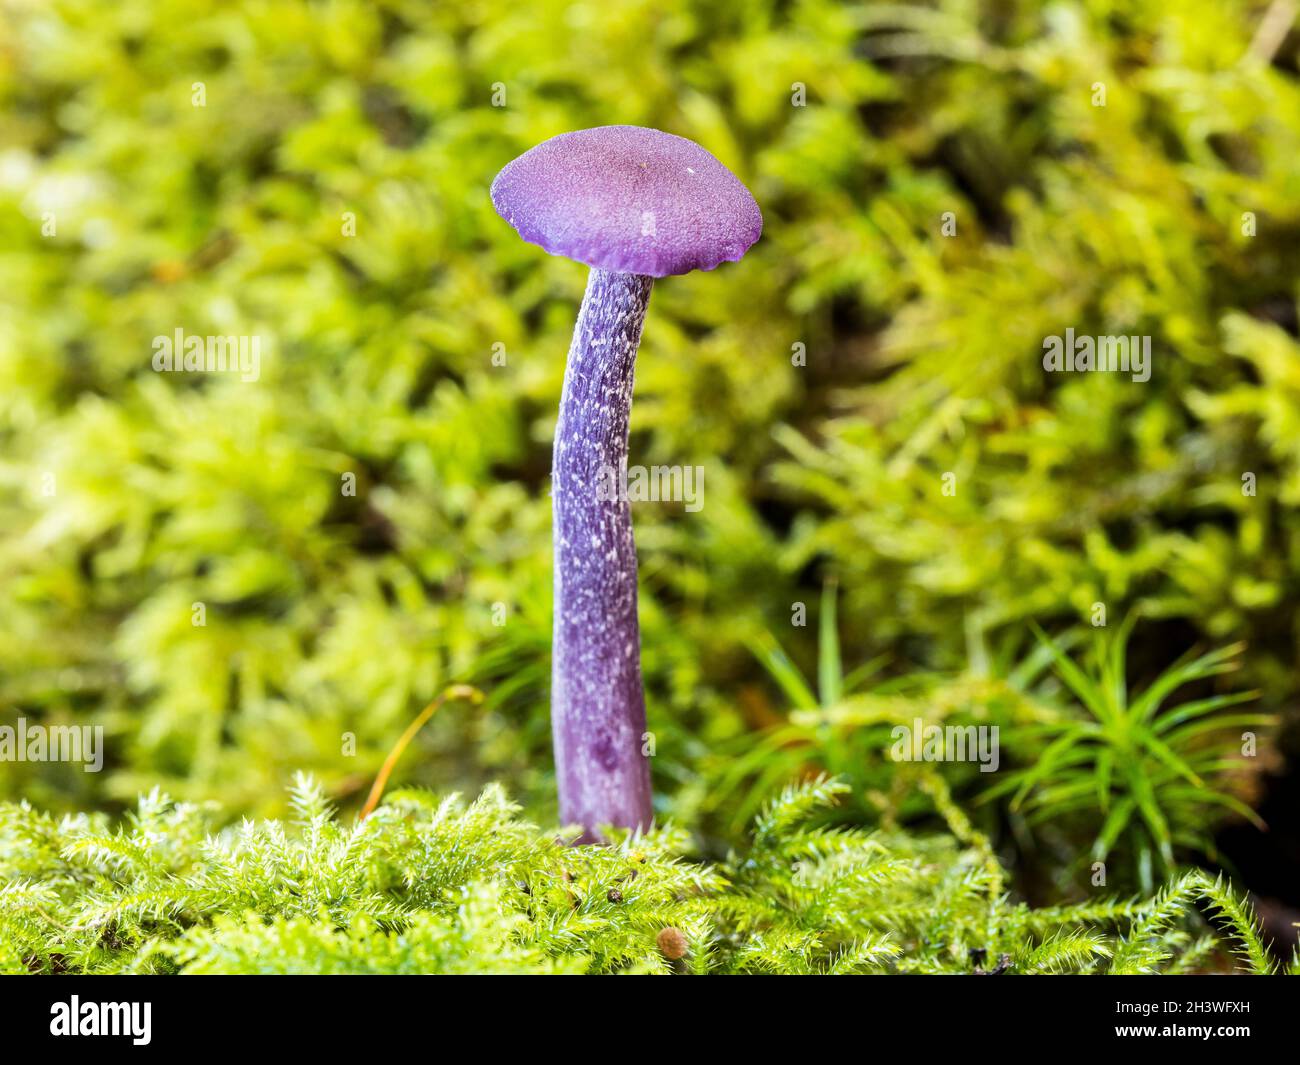 An amethyst deceiver mushroom in mid Wales in autumn Stock Photo